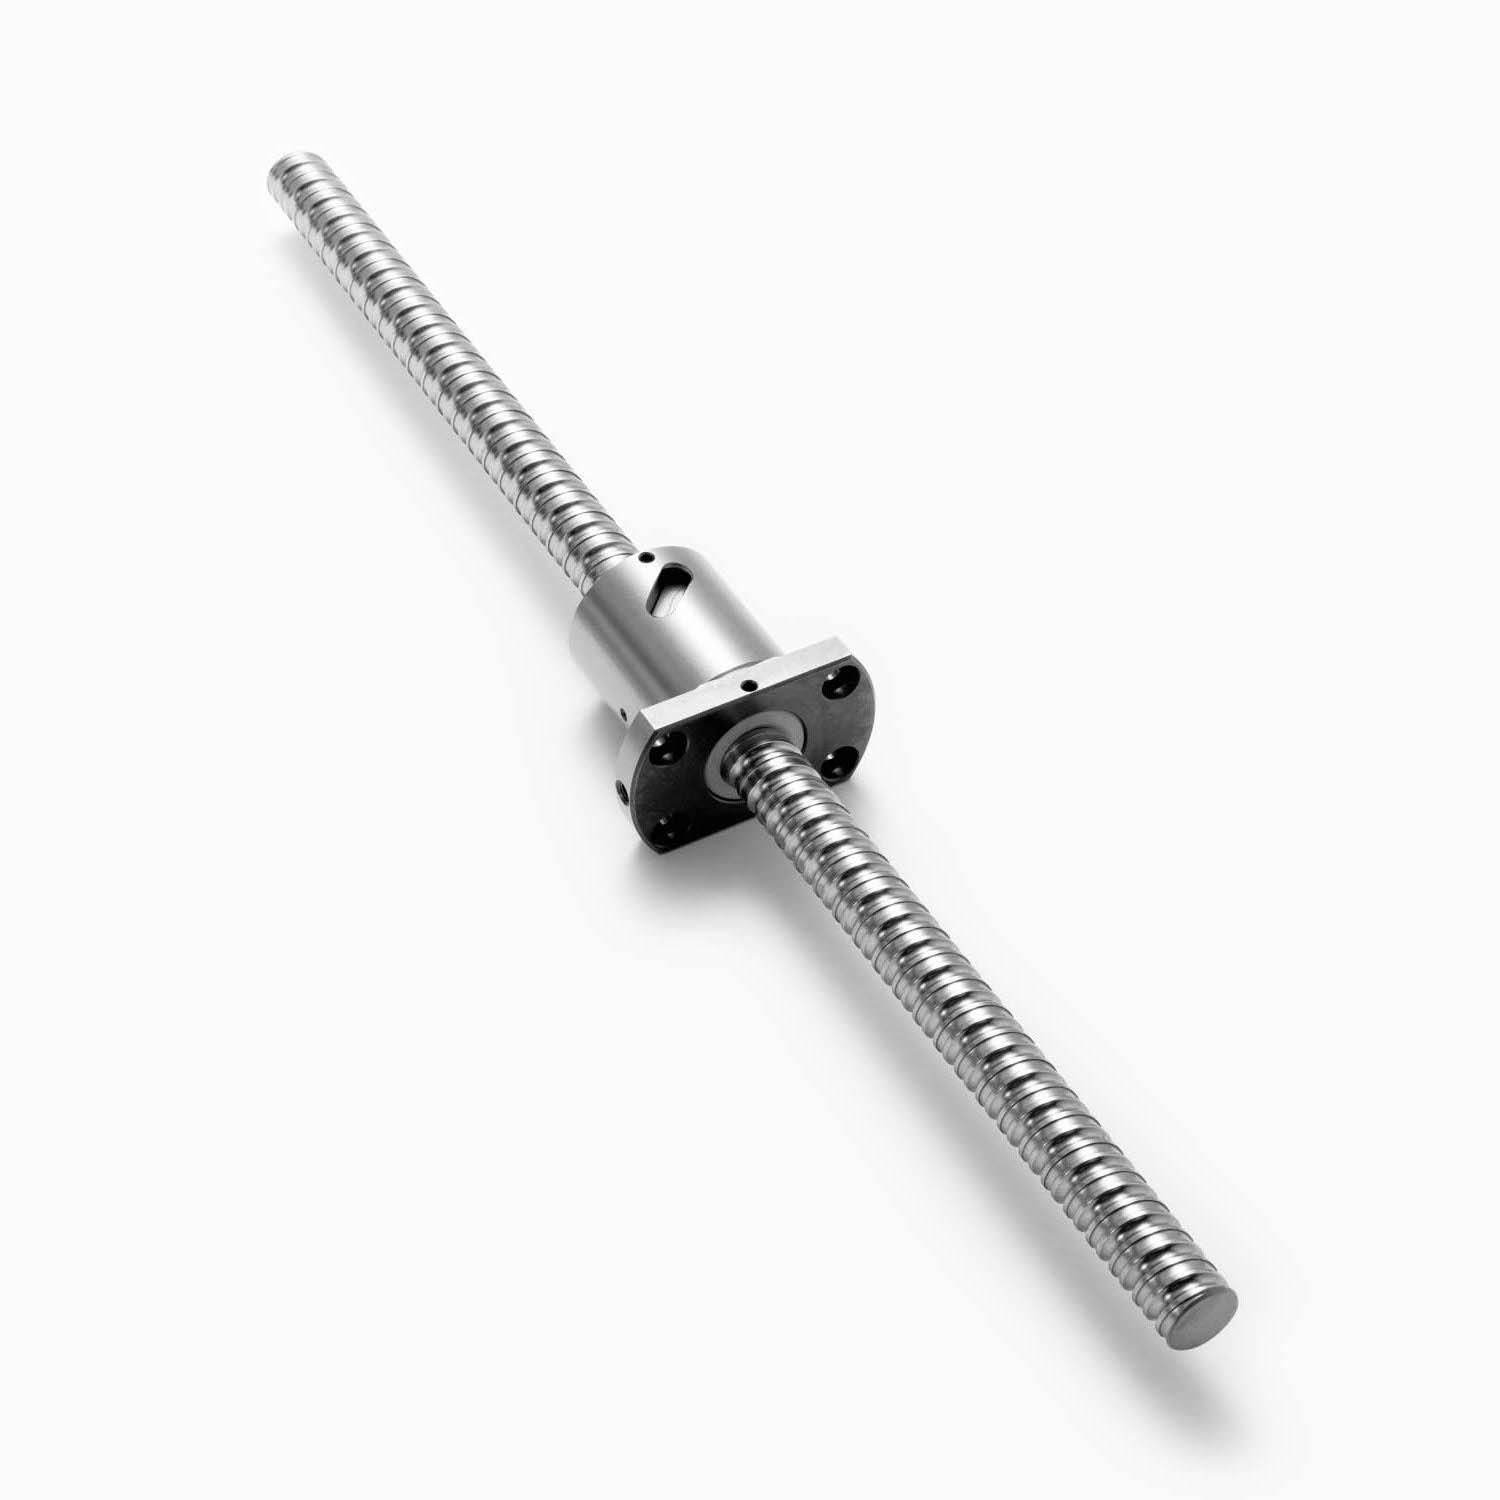 What is the difference between a lead screw and a ball screw?